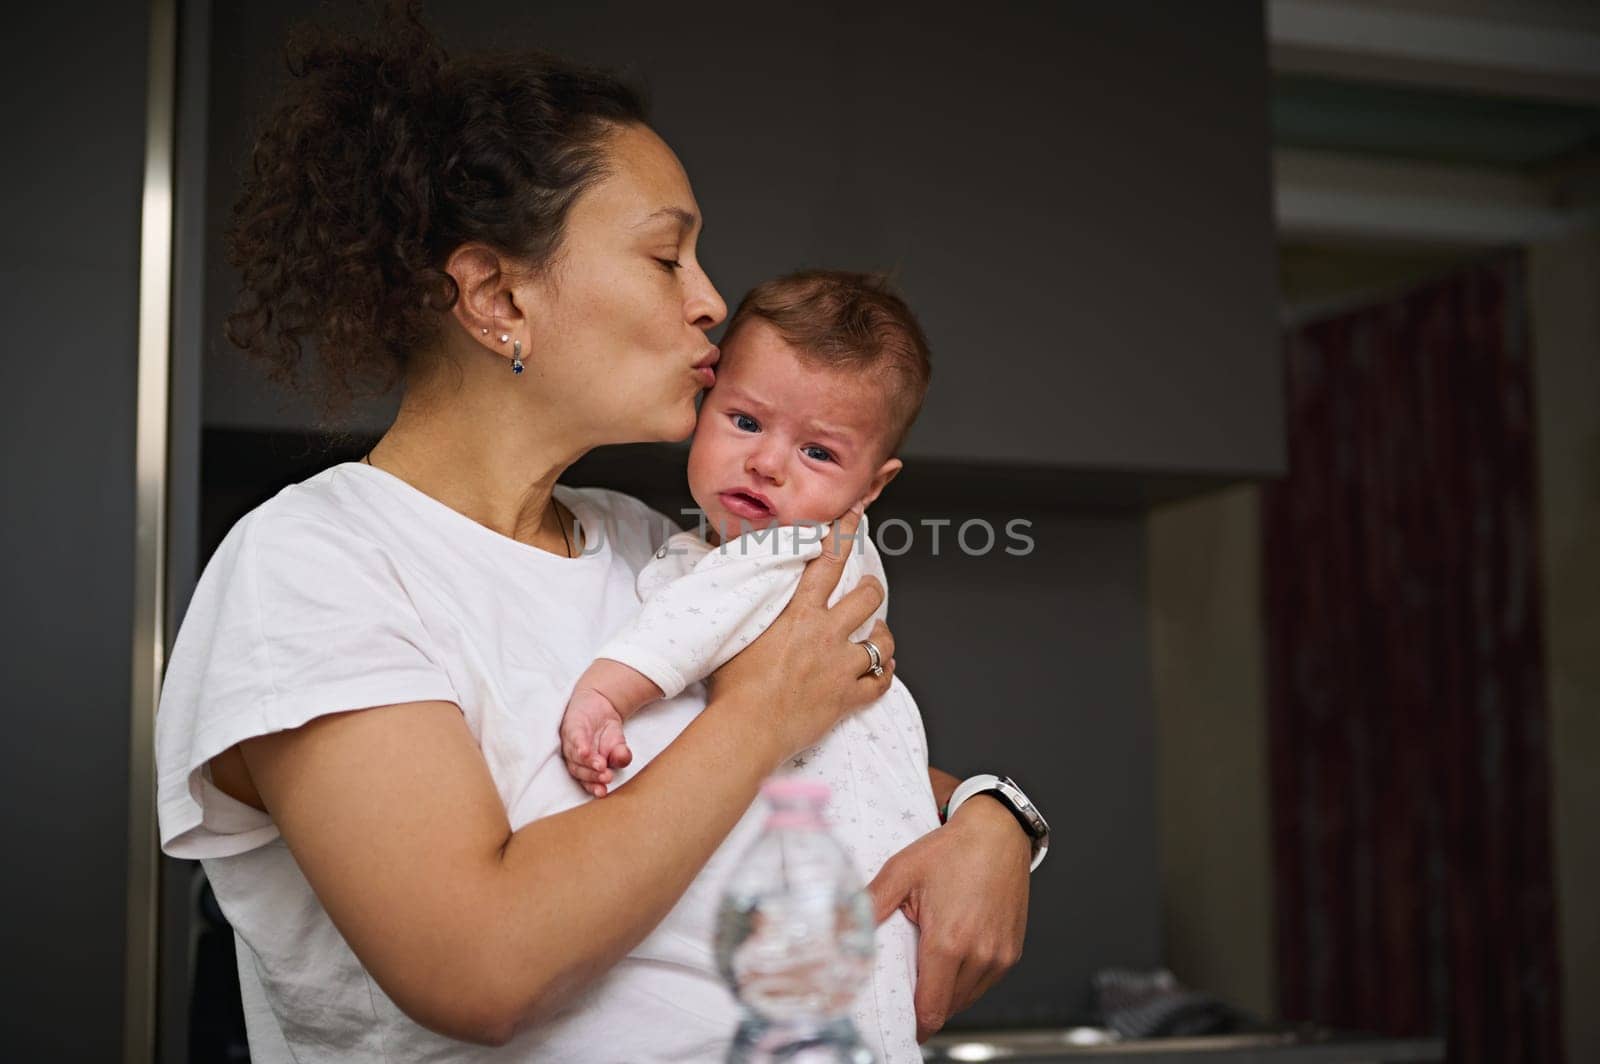 Affectionate young mother kissing temple of her child's head, measuring temperature of her crying baby boy. Childcare. Health check. Babyhood. Maternity. Infancy. Health care and Pediatrics medicine by artgf